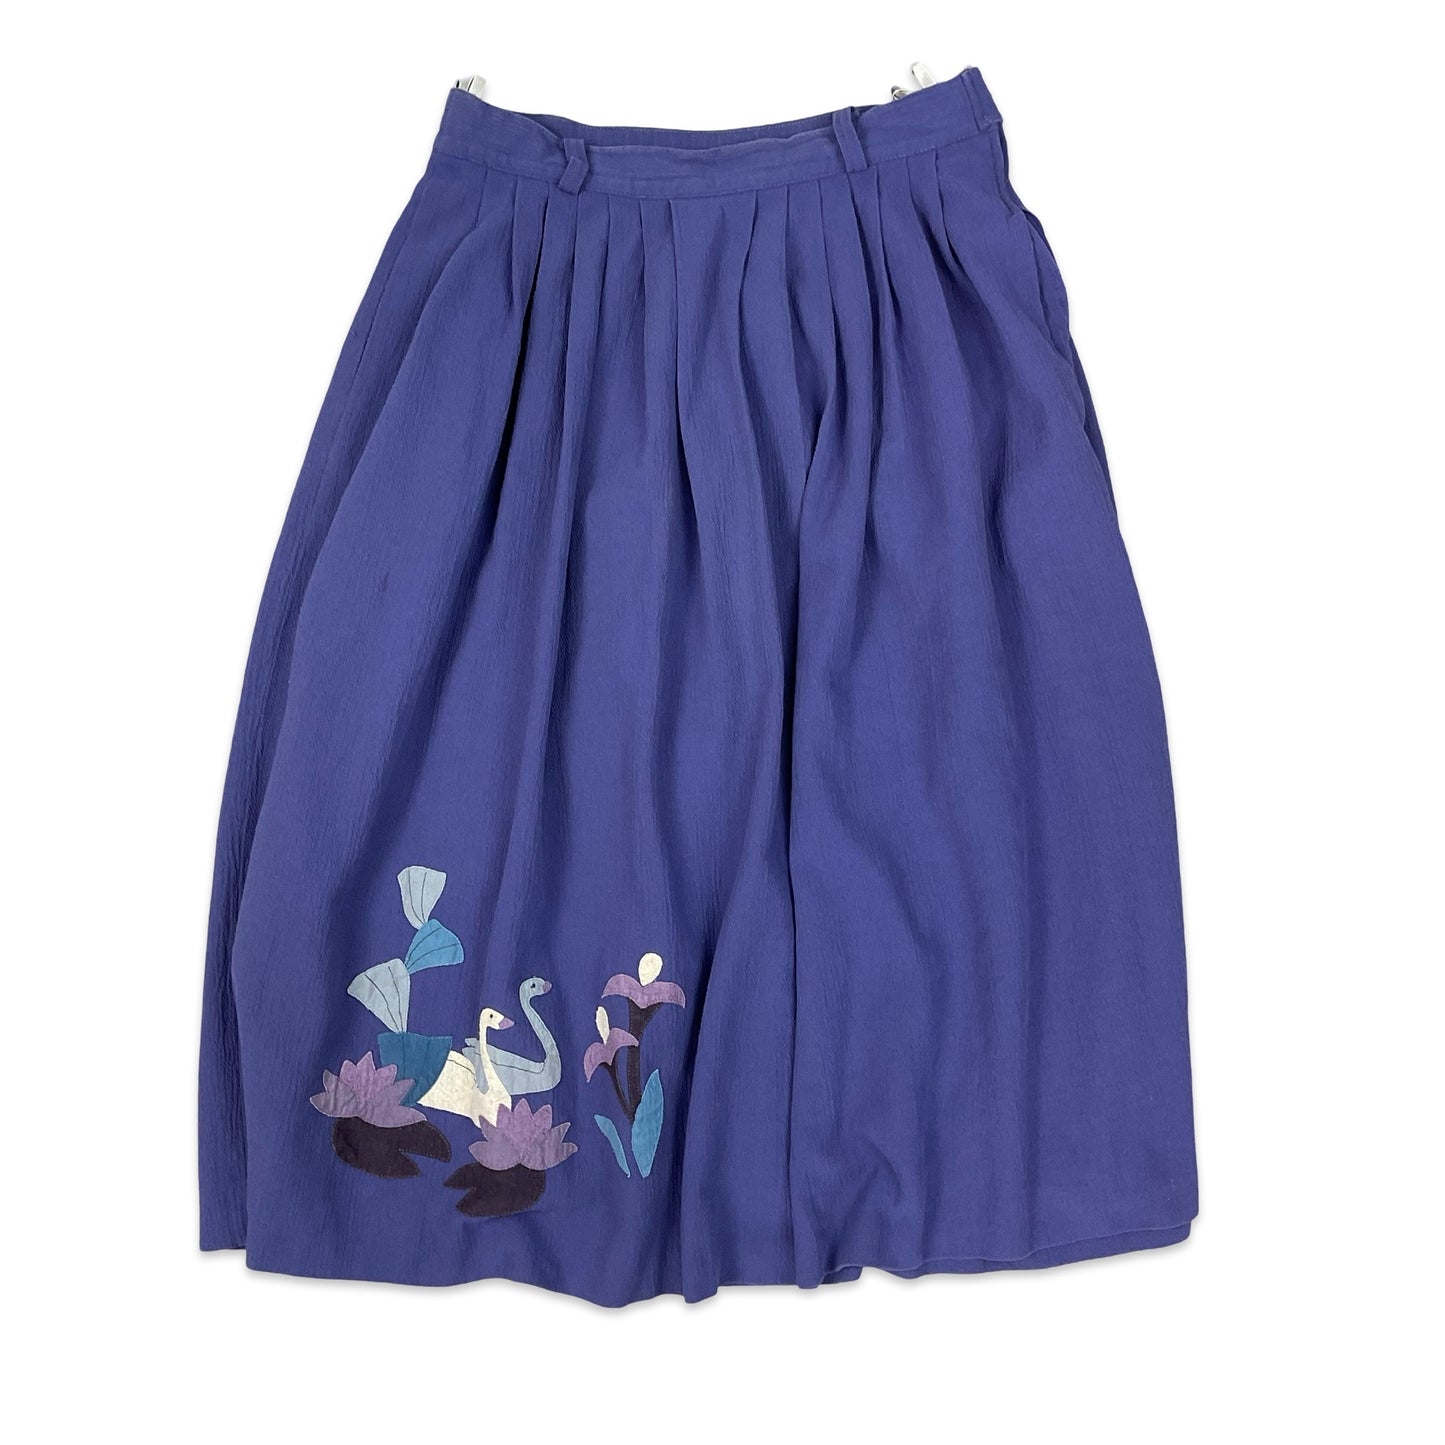 Vintage Purple Pleated Midi Skirt with Embroidered Geese Graphic 10